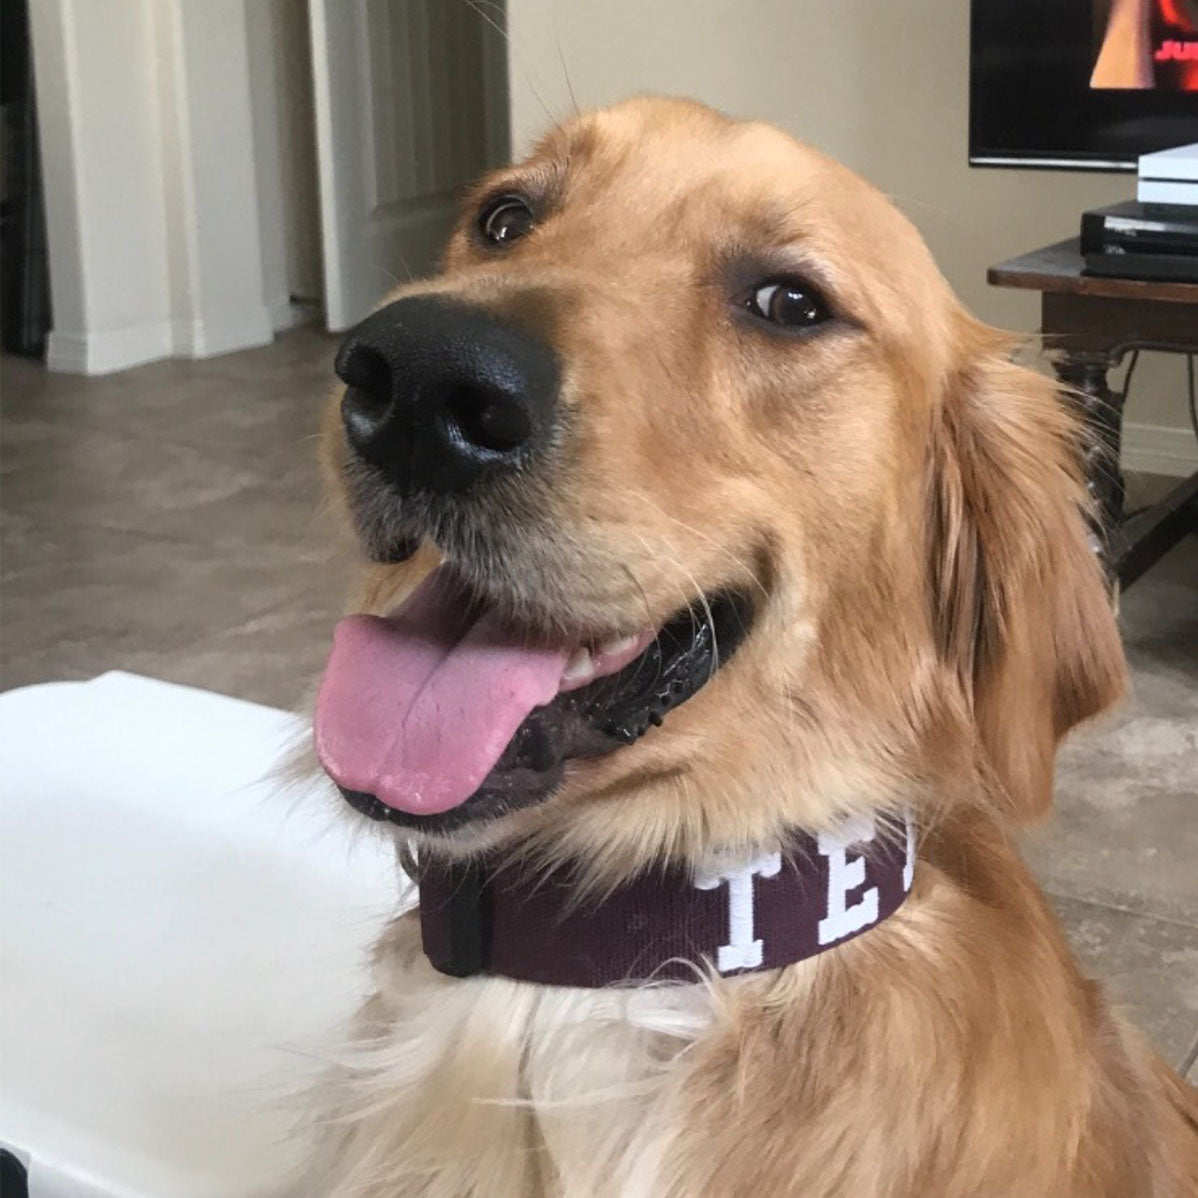 Texas A&M Embroidered Dog Collar